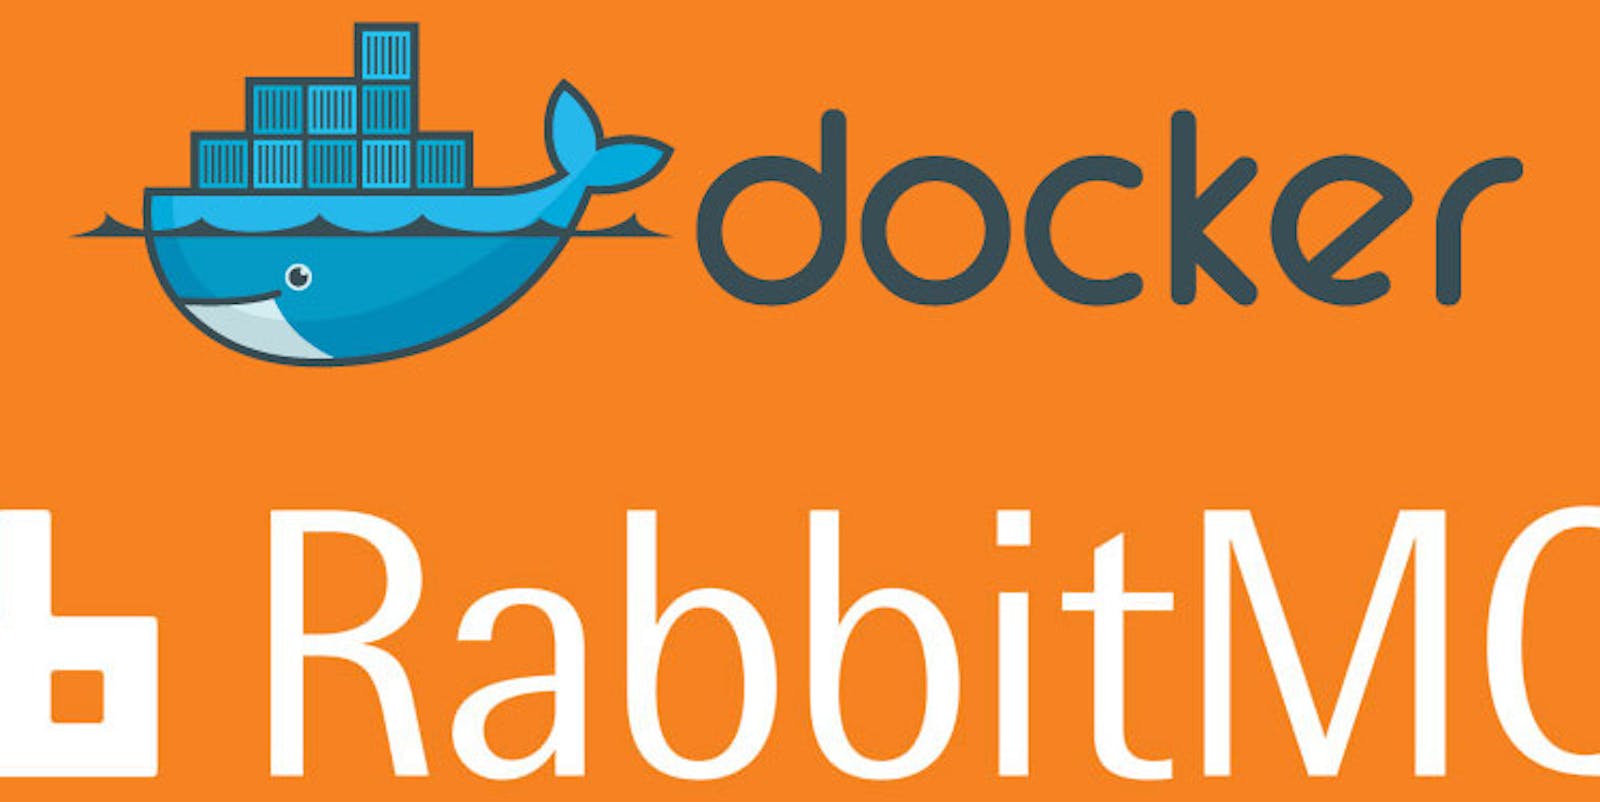 Step-by-Step Guide to Installing RabbitMQ using Docker